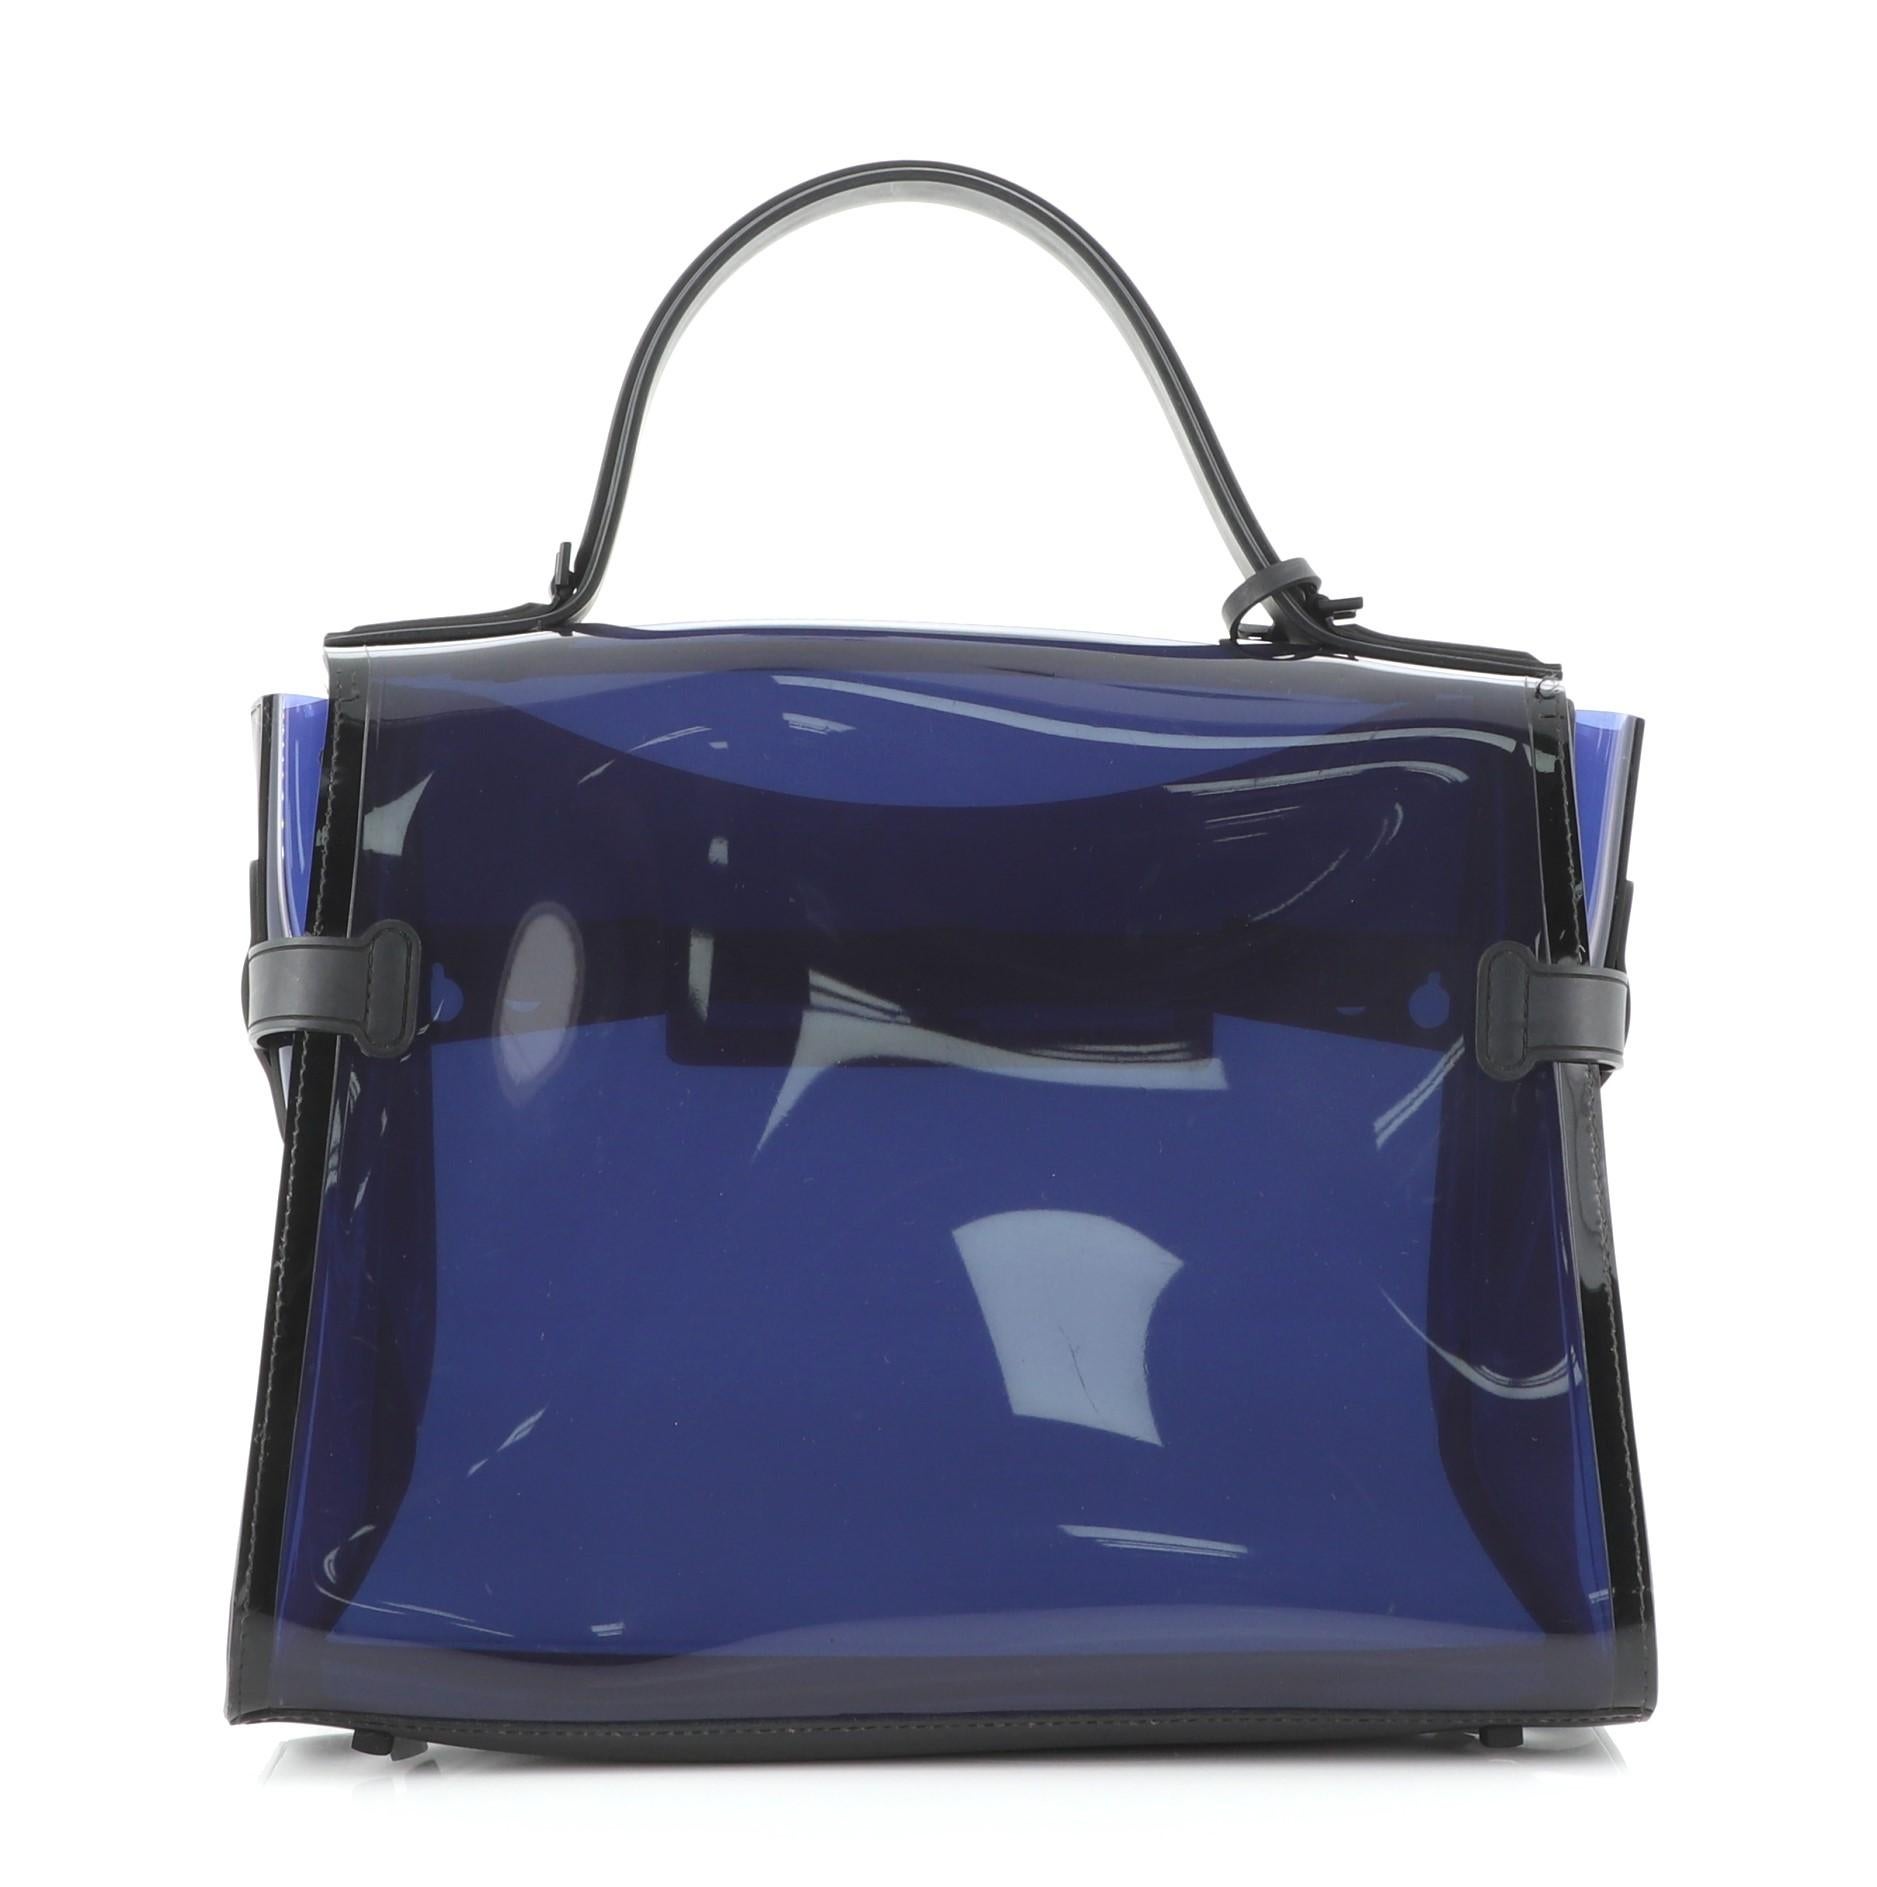 Delvaux Tempete Top Handle Bag Vinyl GM
Blue

Condition Details: Loose stitching on flap opening corner. Moderate creasing, wear and scuffs on exterior and in interior, scratches on hardware.

51012MSC

Height 10